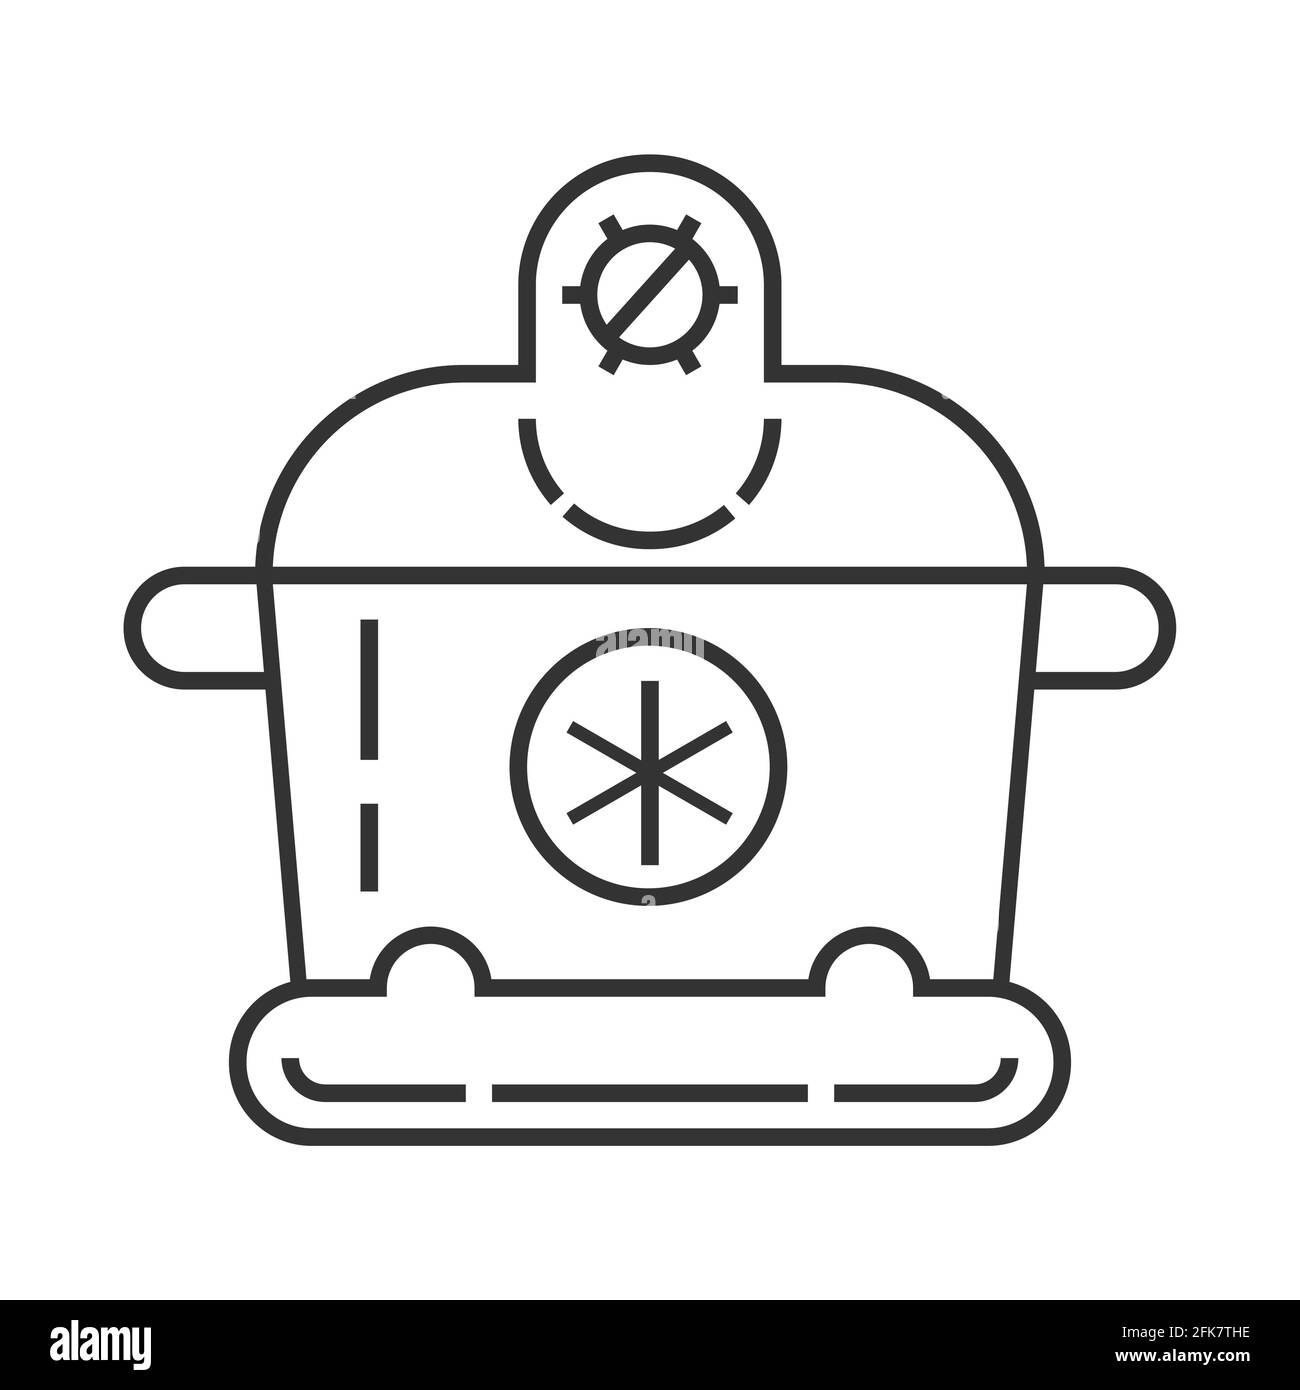 Ice cream maker pixel perfect icon vector. Kitchen small appliances line sign. Household tools symbol for app, web. Cooking equipment is shown. Stock Vector